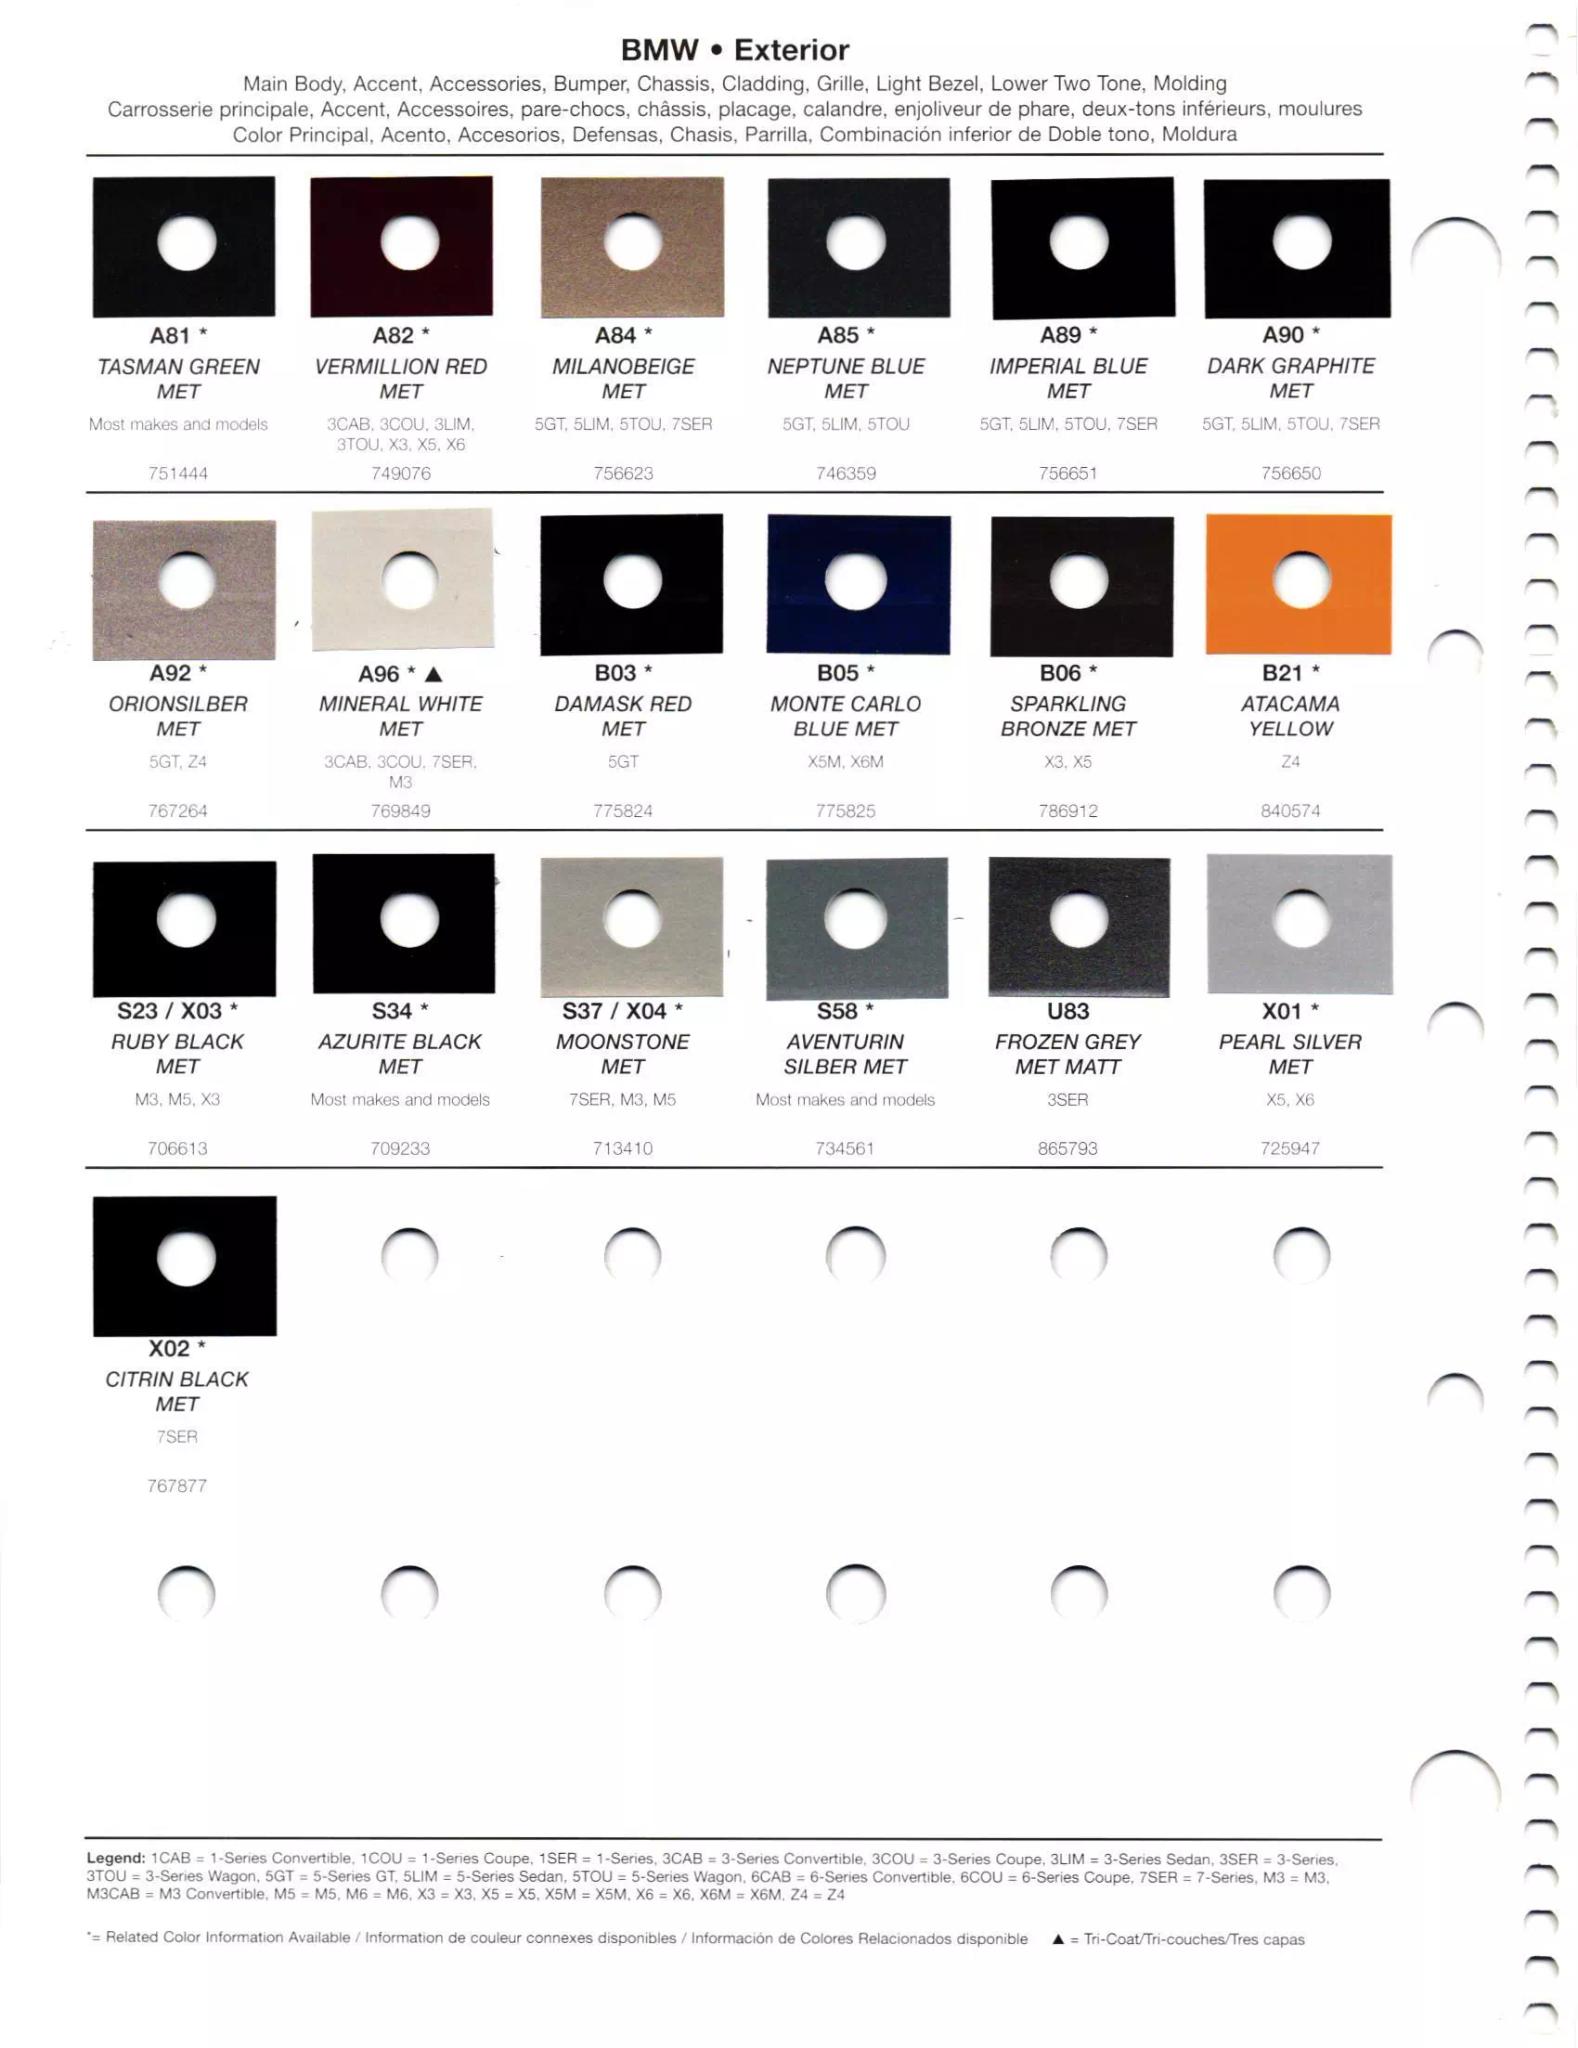 Paint Chips for Exterior, Interior, and Wheel Colors For BMW Colors in 2011